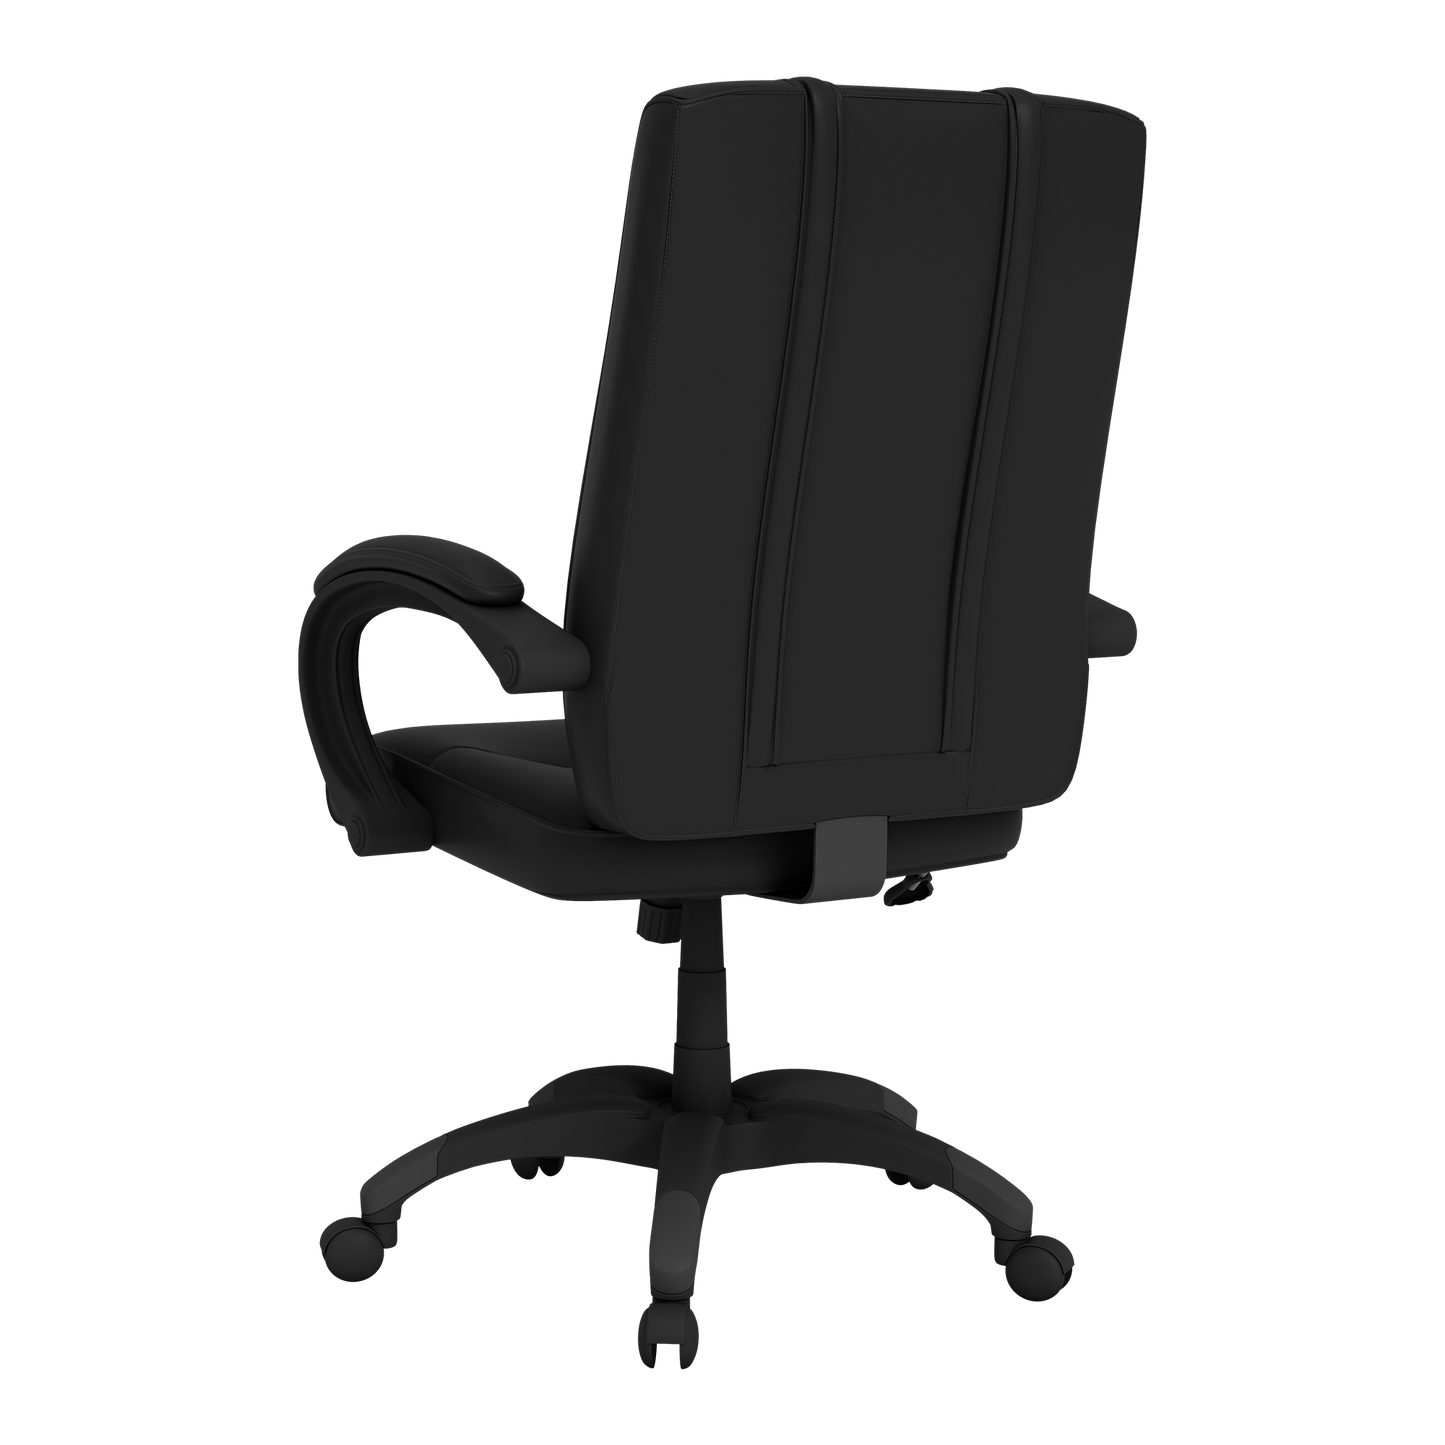 Office Chair 1000 with South Dakota Coyotes Emblem Logo